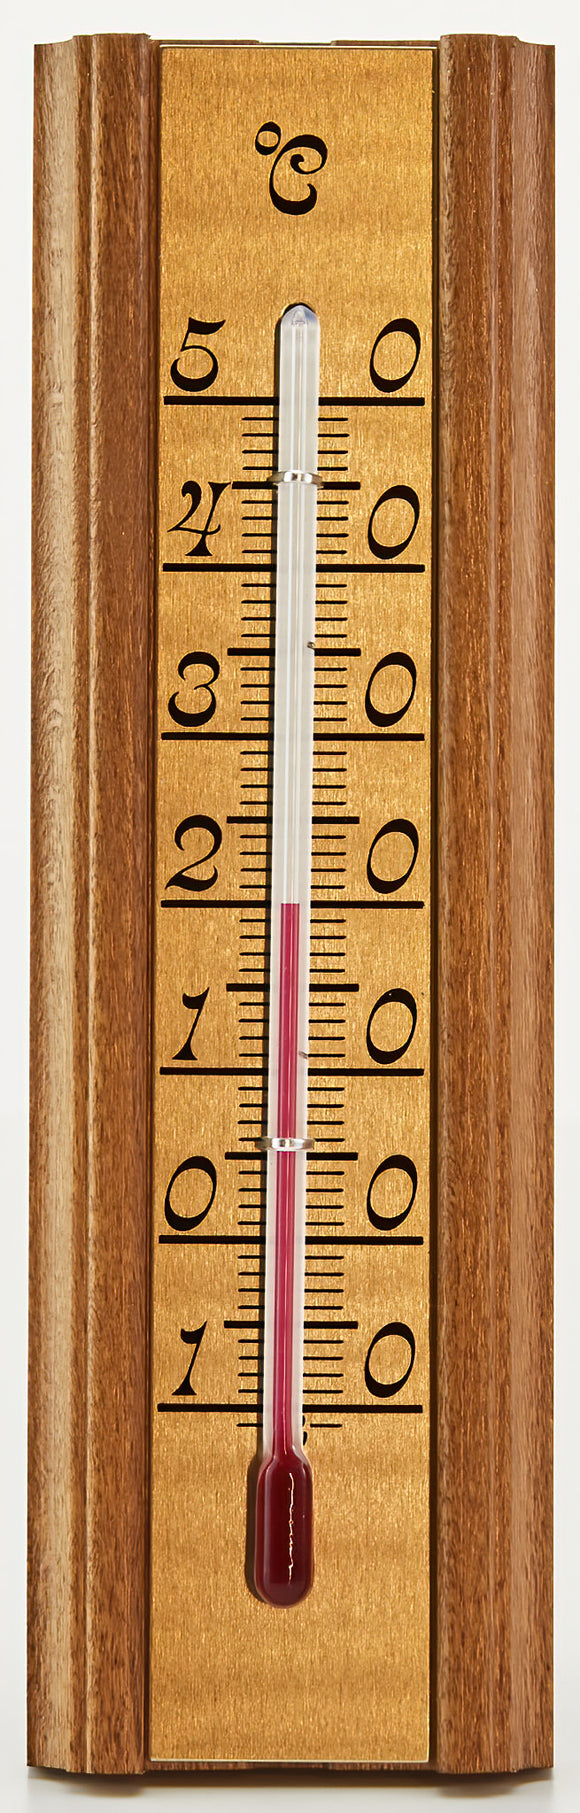 Small Wood-Mount Spirit Thermometer